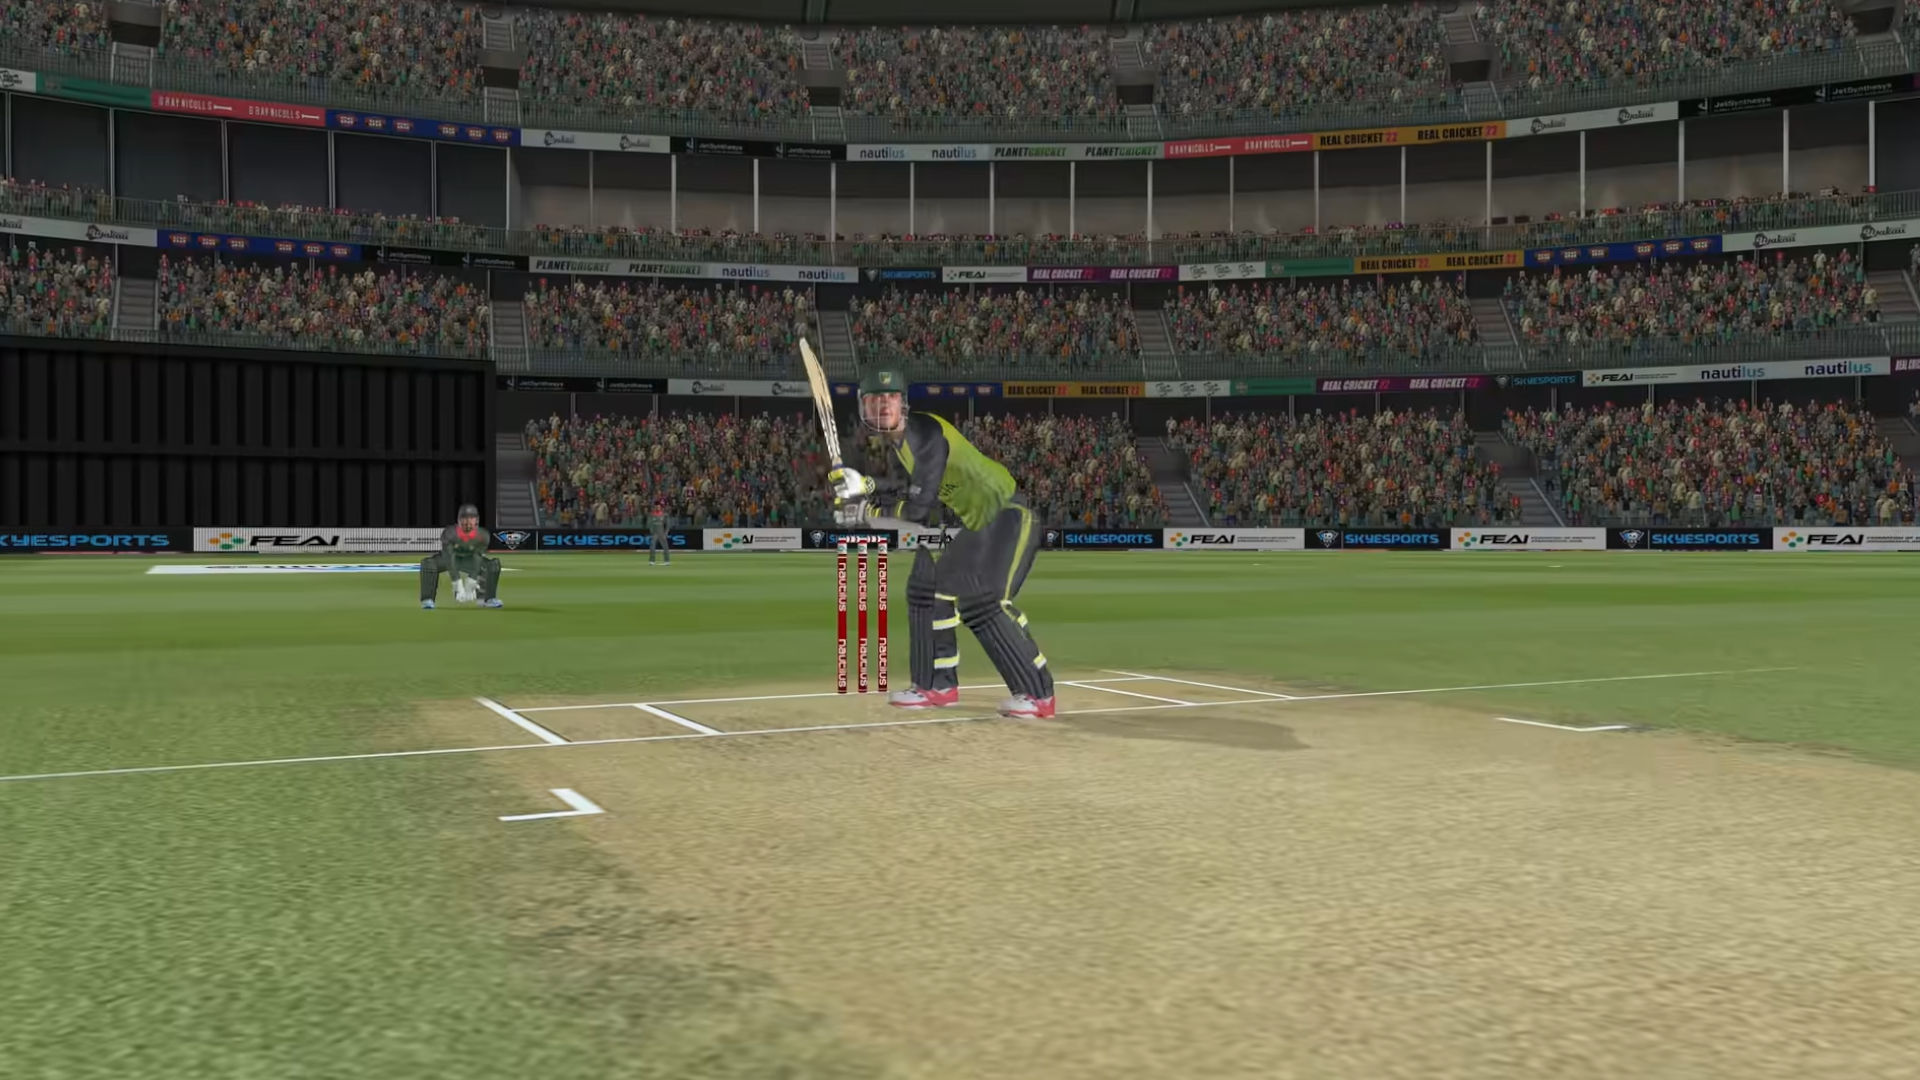 Hit sixes in the sun with mobile game Real Cricket 22's release date